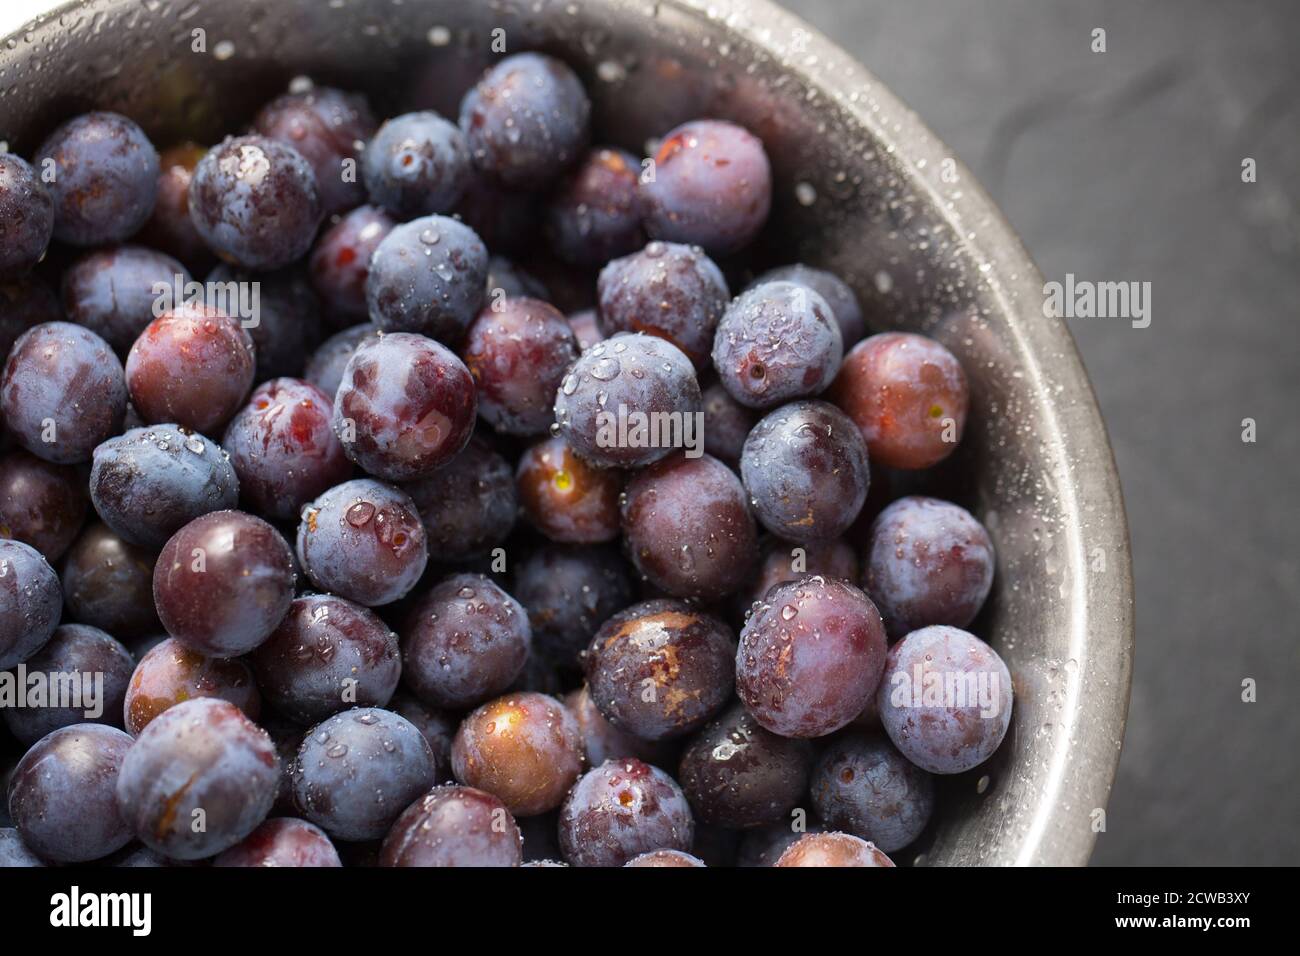 Bullace, a type of plum, that were picked from a tree growing near homes. They have been washed in preparation for making jam. Dorset England UK GB Stock Photo